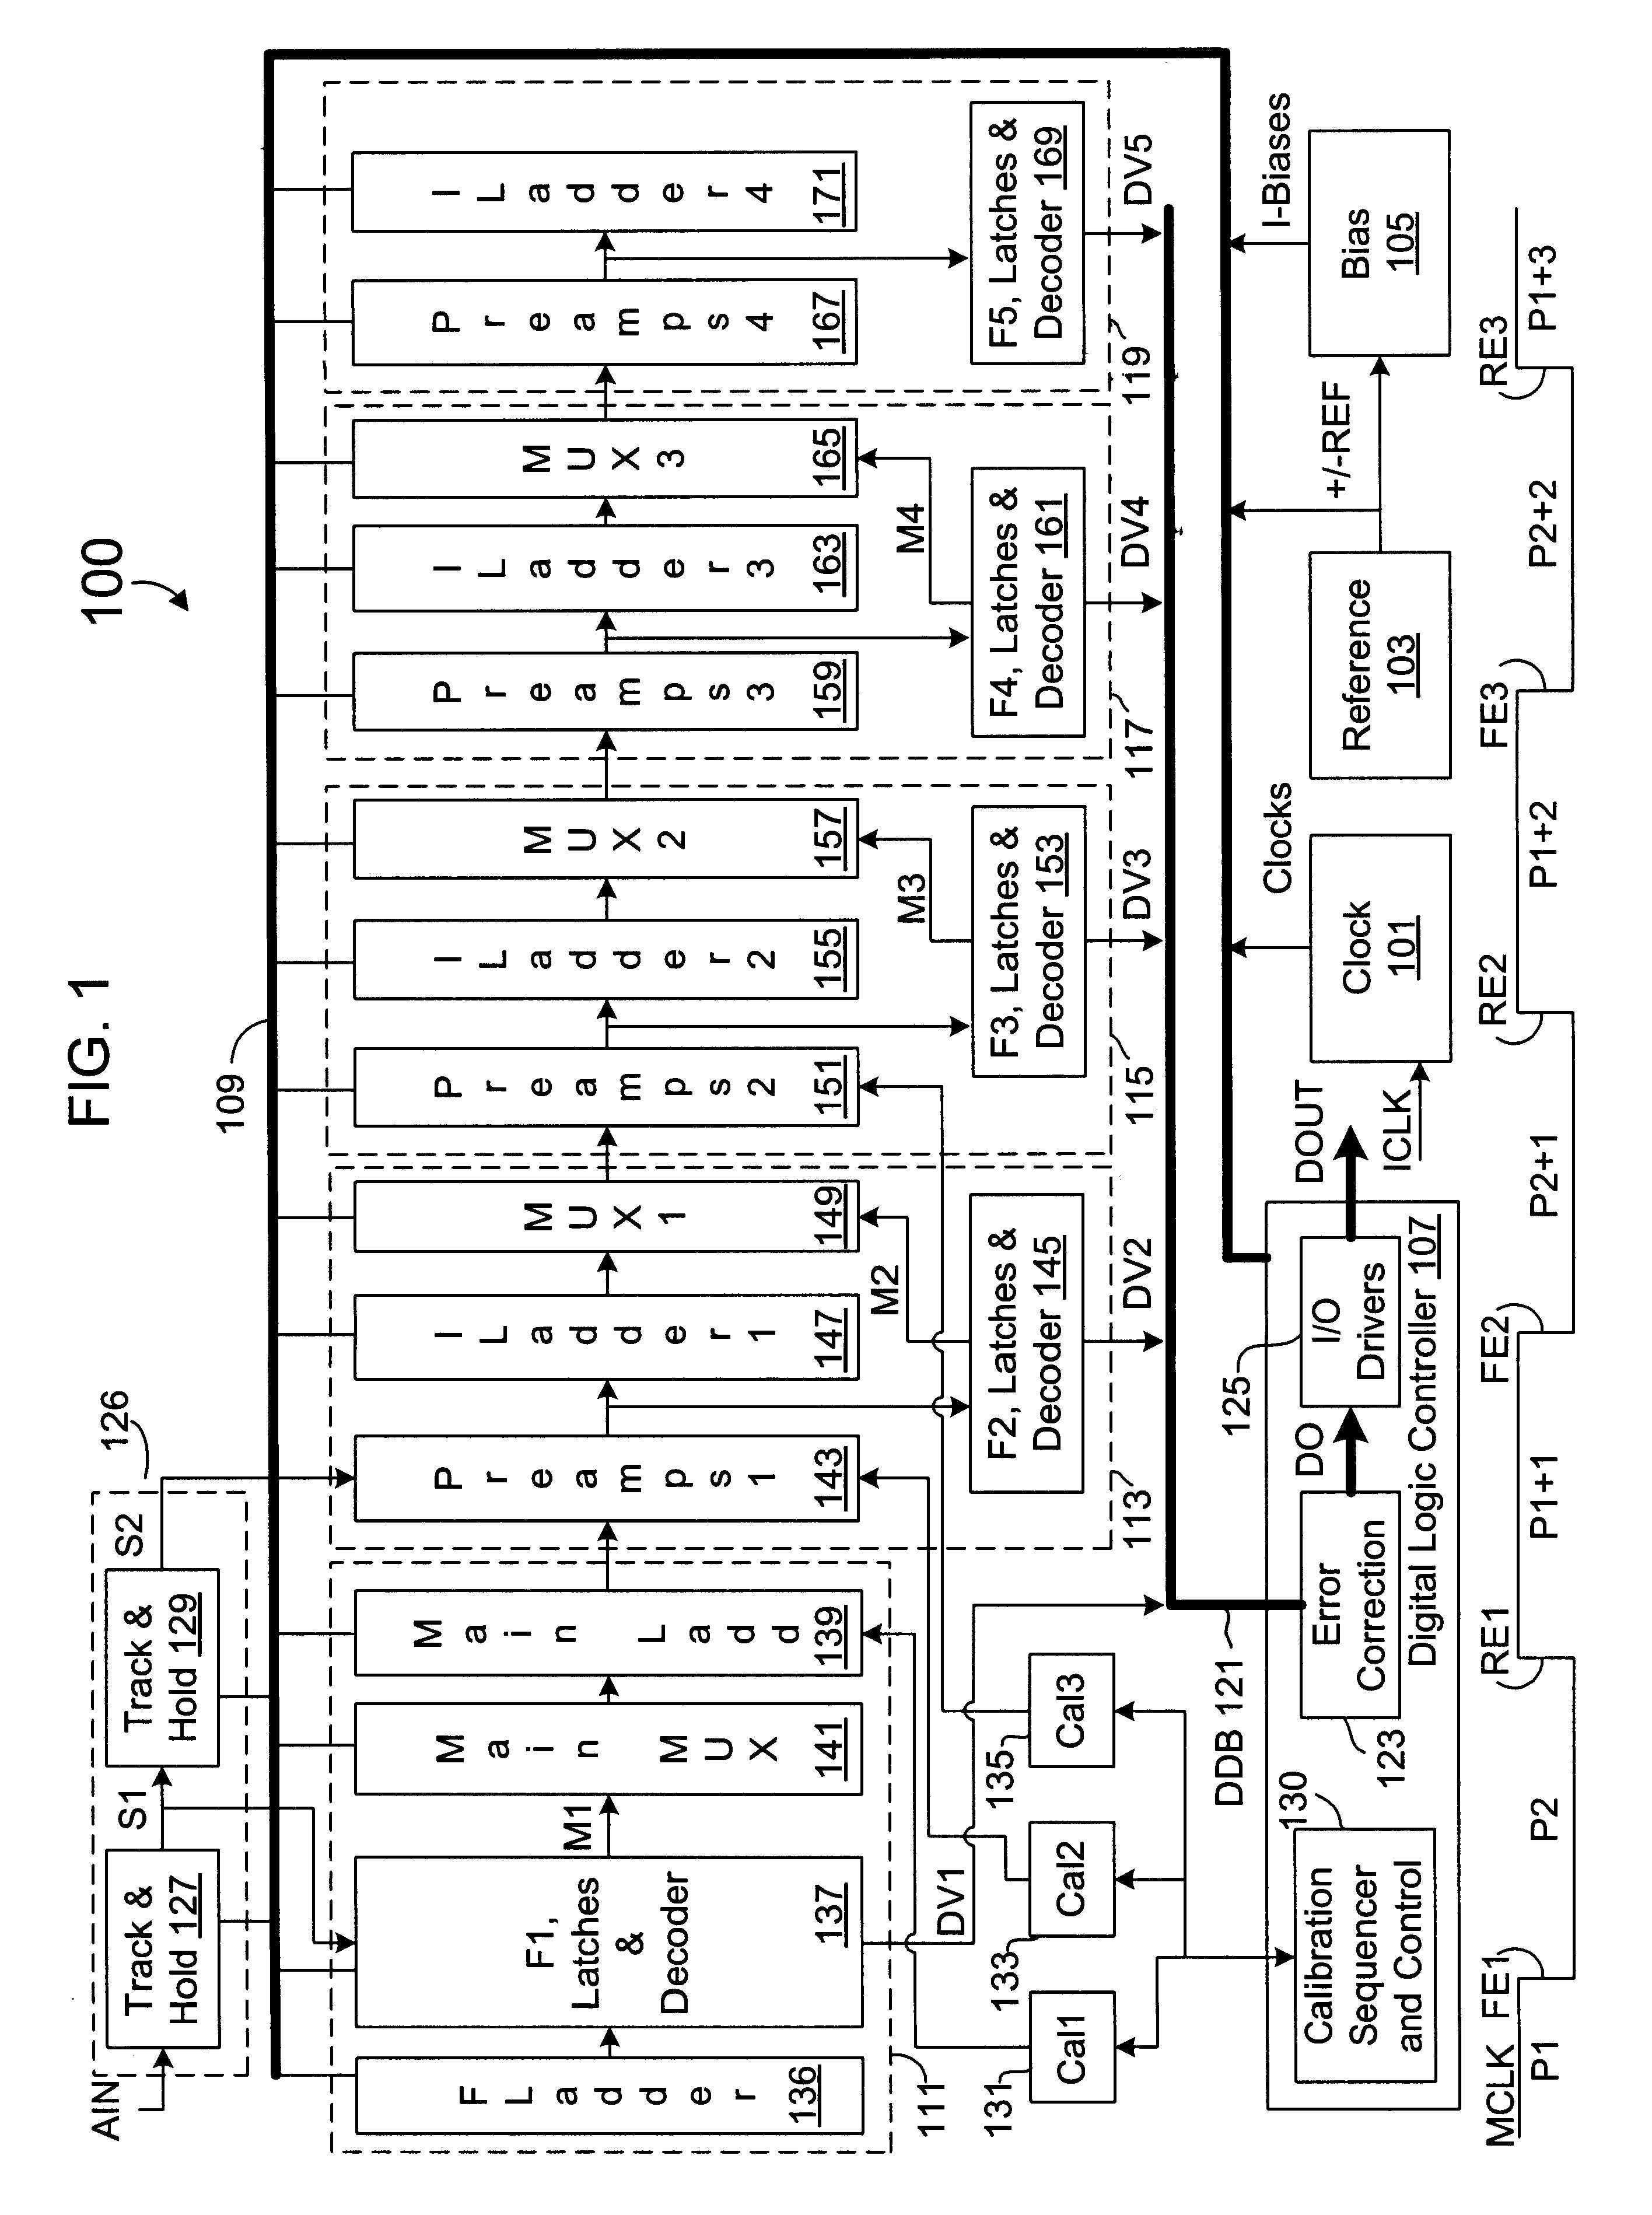 Calibration of resistor ladder using difference measurement and parallel resistive correction